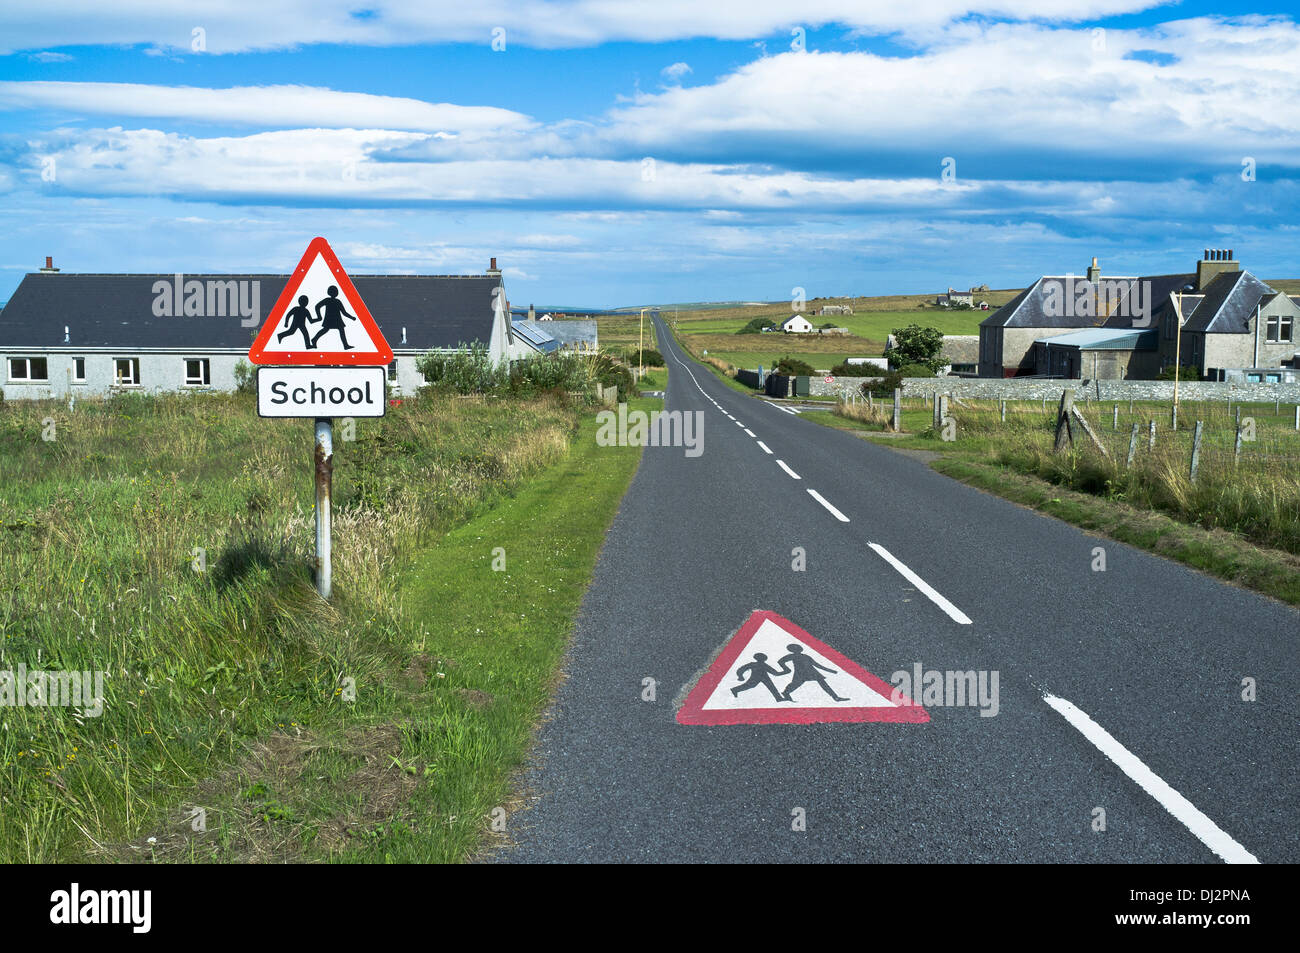 dh FLOTTA ORKNEY School roadsign for Small Country village signalisations école uk Road sign scottish rural Islands scottish remote Banque D'Images